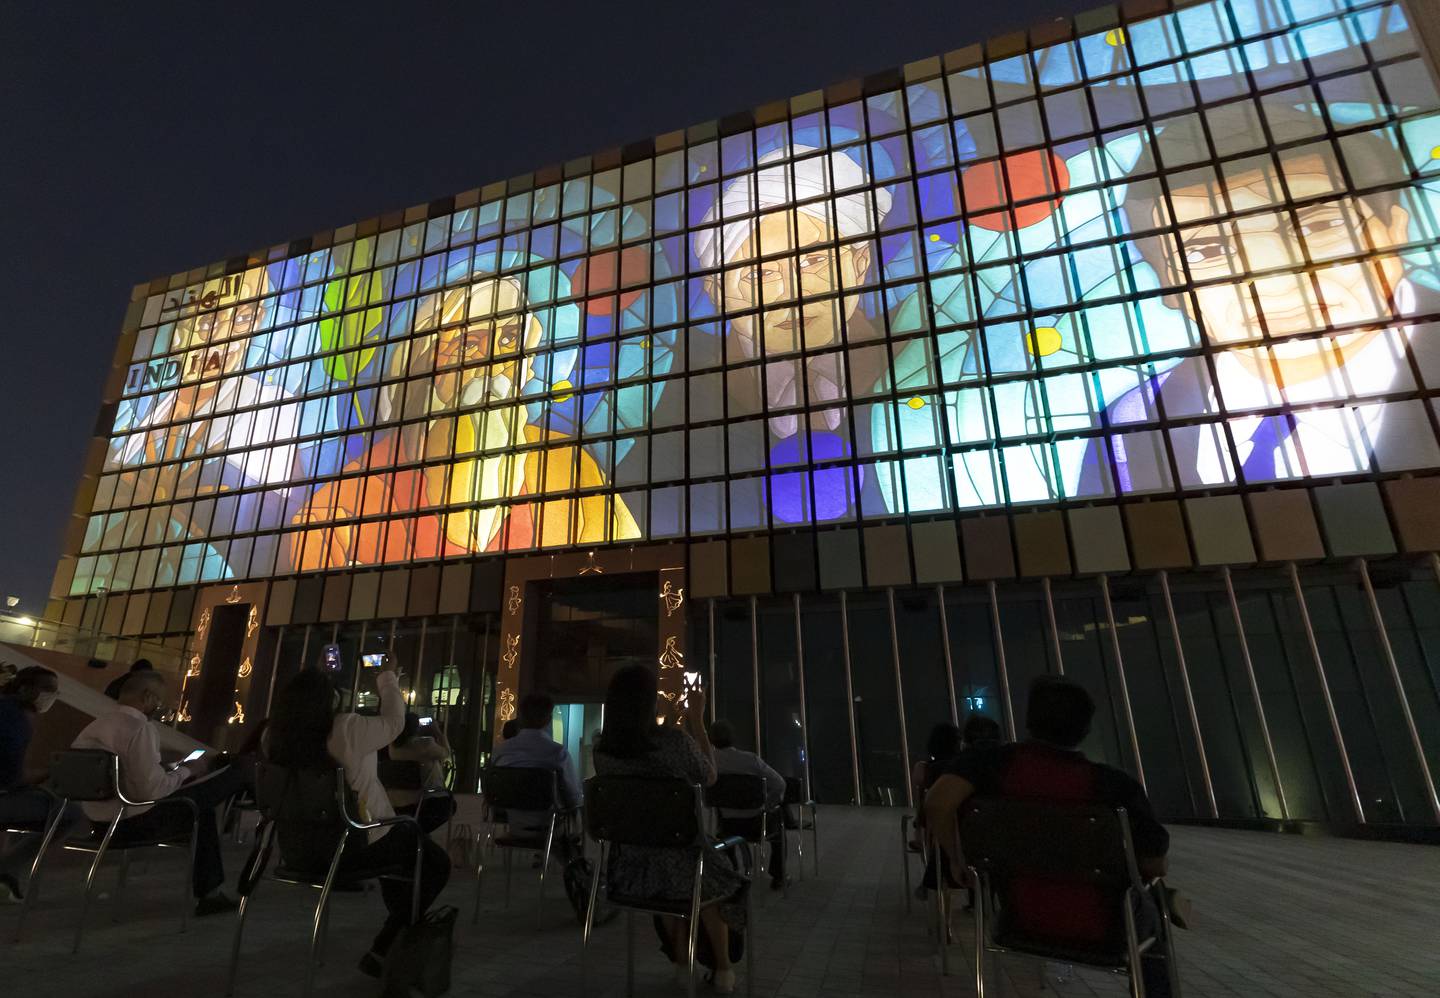 India's pavilion lit up the night sky as anticipation grows for Expo 2020 Dubai. Chris Whiteoak / The National

